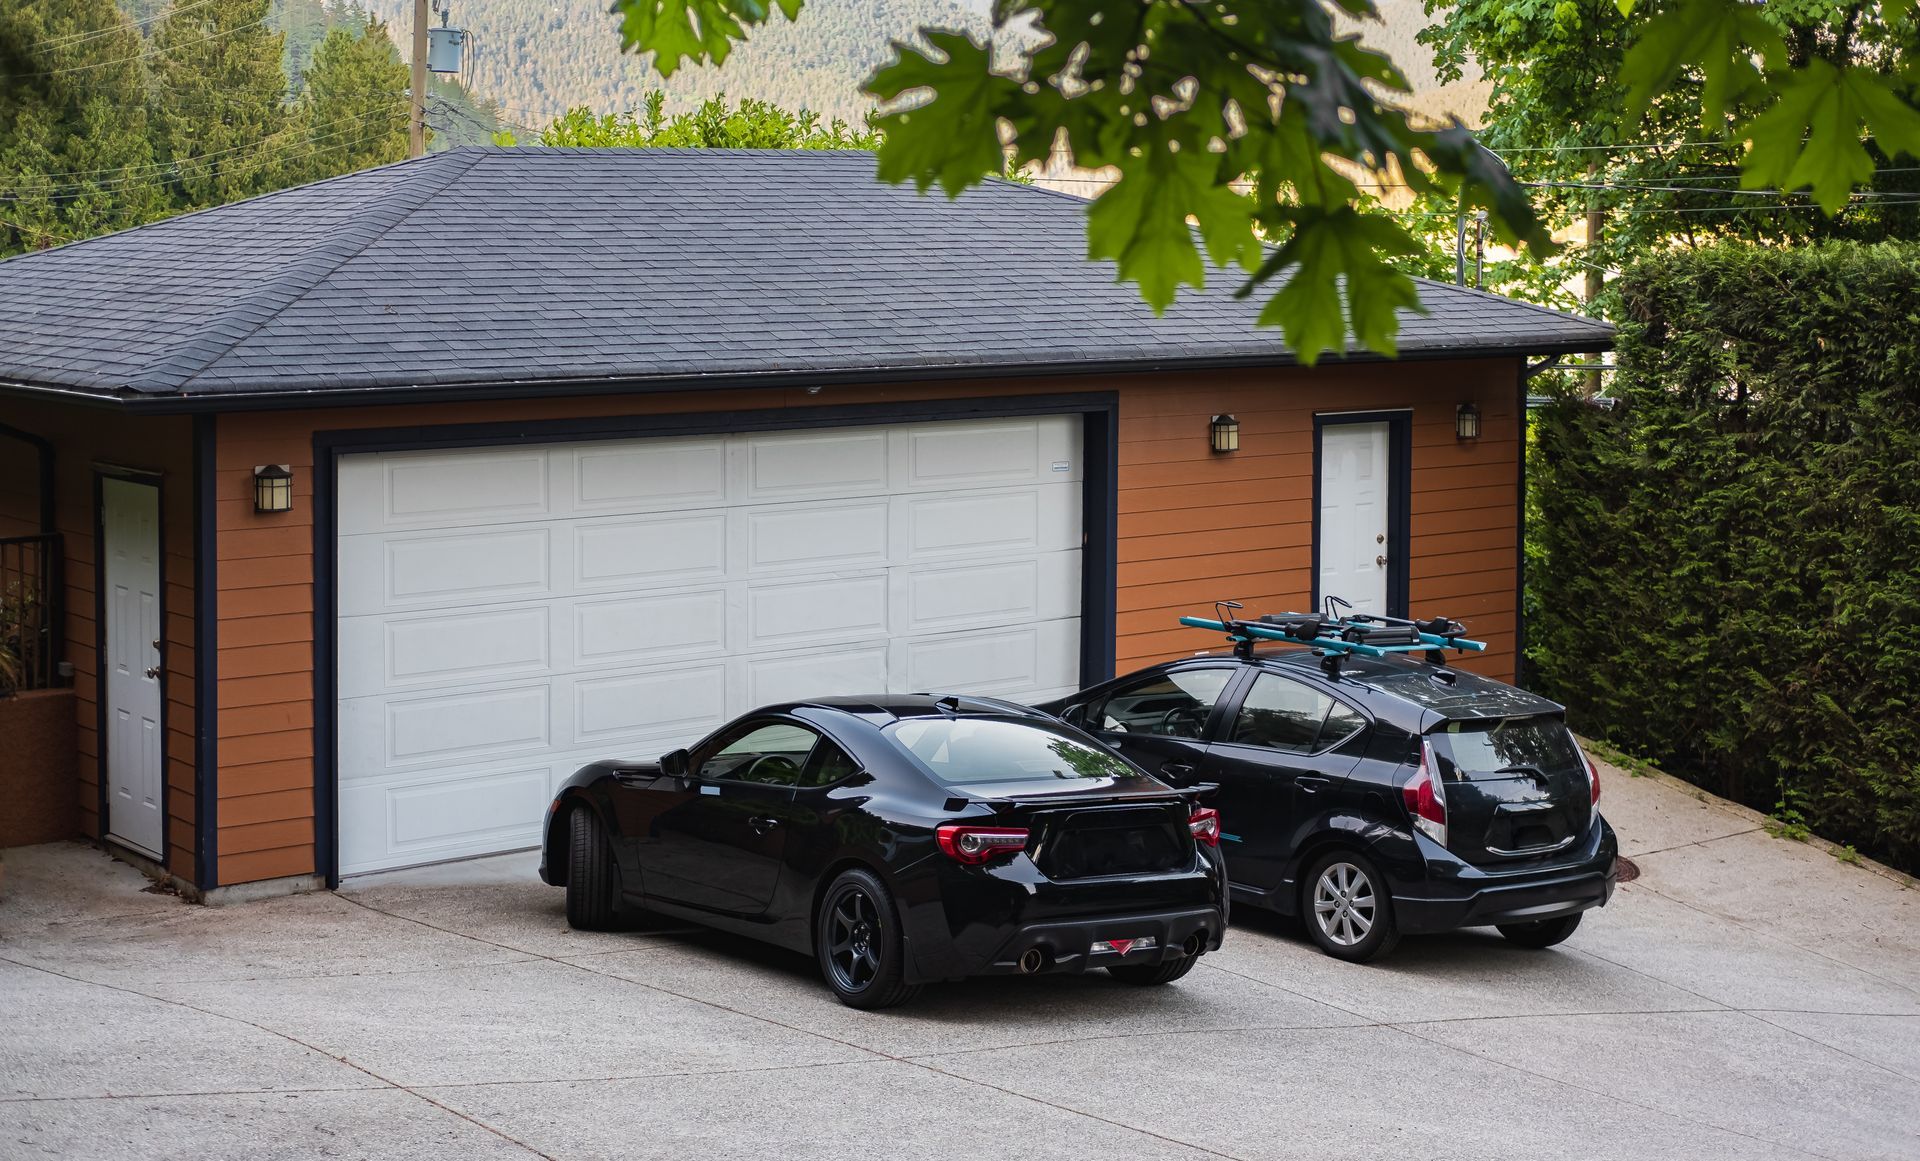 two black cars are parked in front of a garage